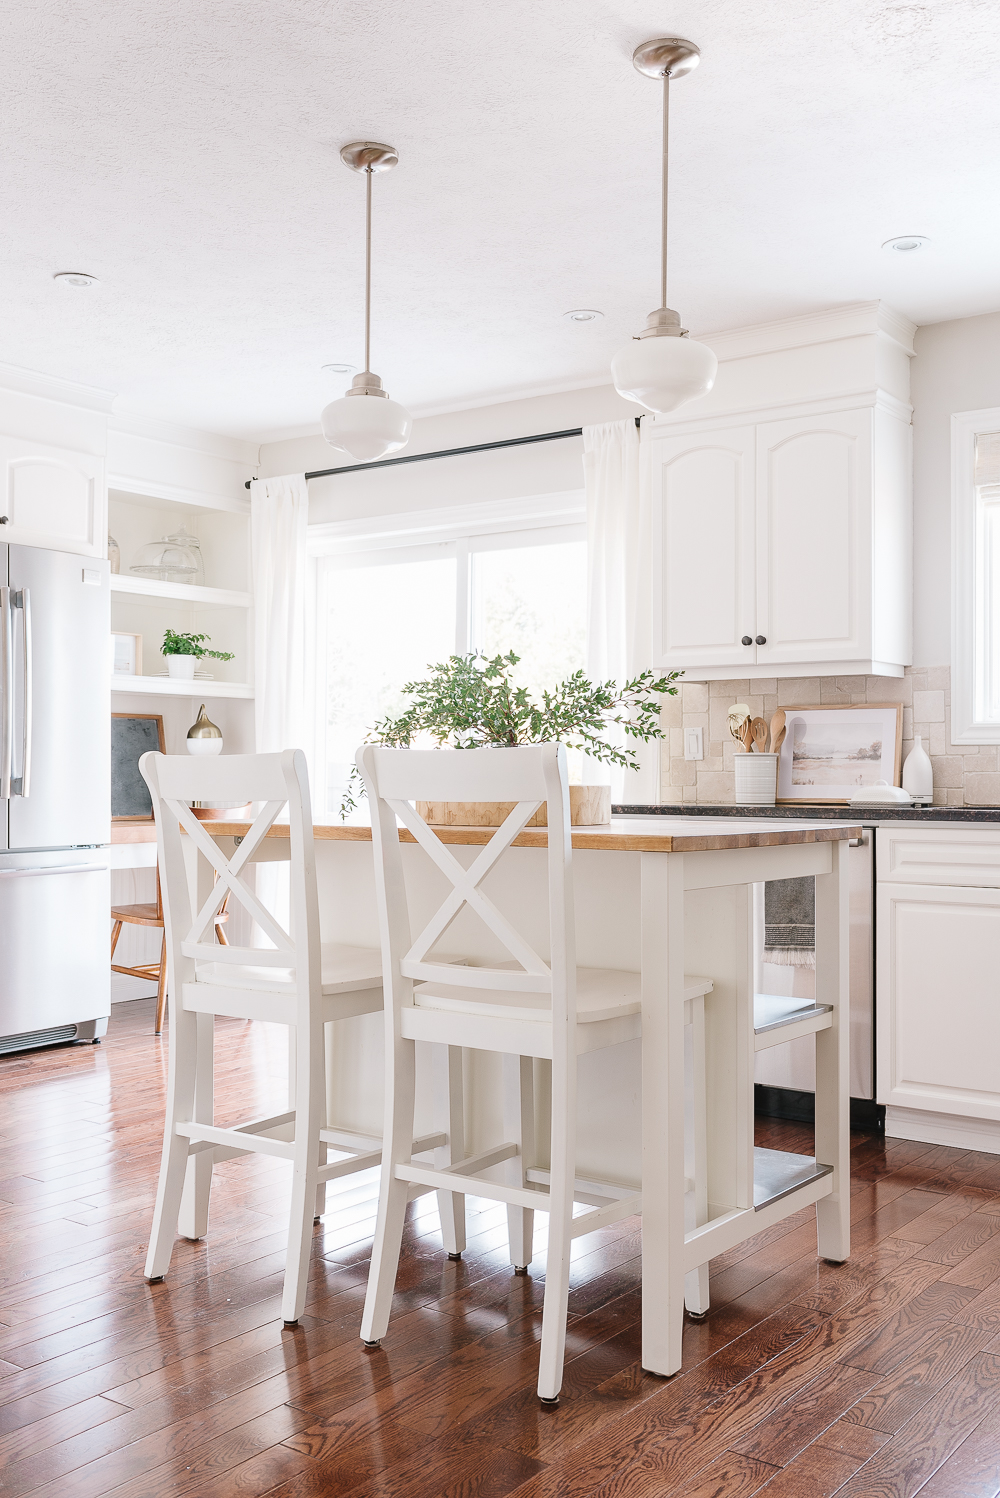 Painting furniture white: secrets to the perfect finish